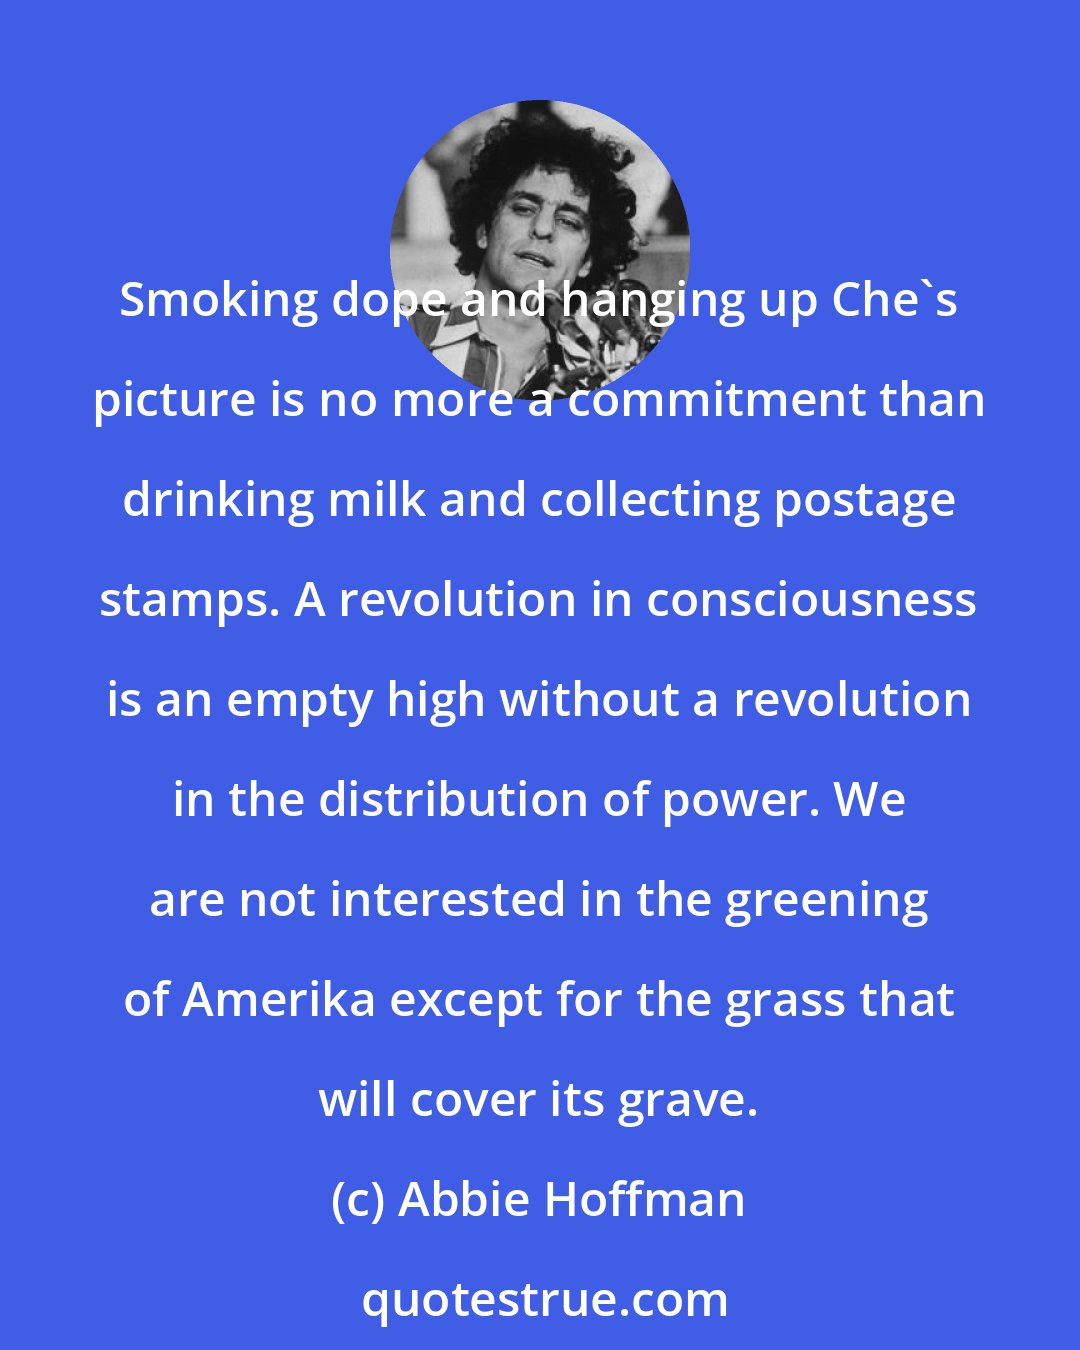 Abbie Hoffman: Smoking dope and hanging up Che's picture is no more a commitment than drinking milk and collecting postage stamps. A revolution in consciousness is an empty high without a revolution in the distribution of power. We are not interested in the greening of Amerika except for the grass that will cover its grave.